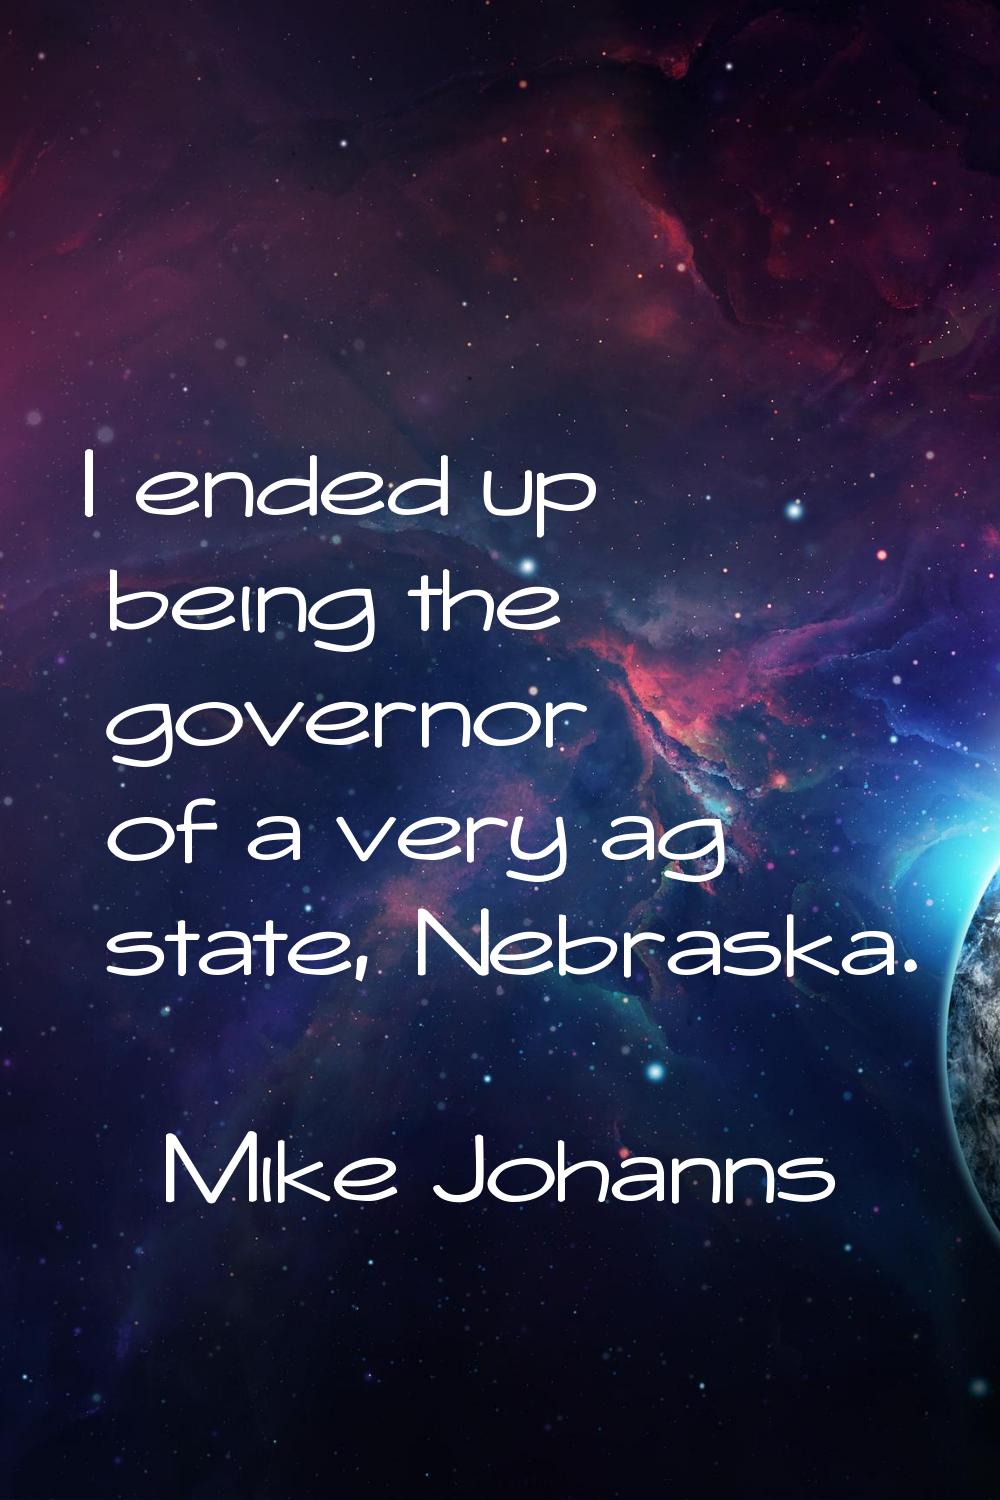 I ended up being the governor of a very ag state, Nebraska.